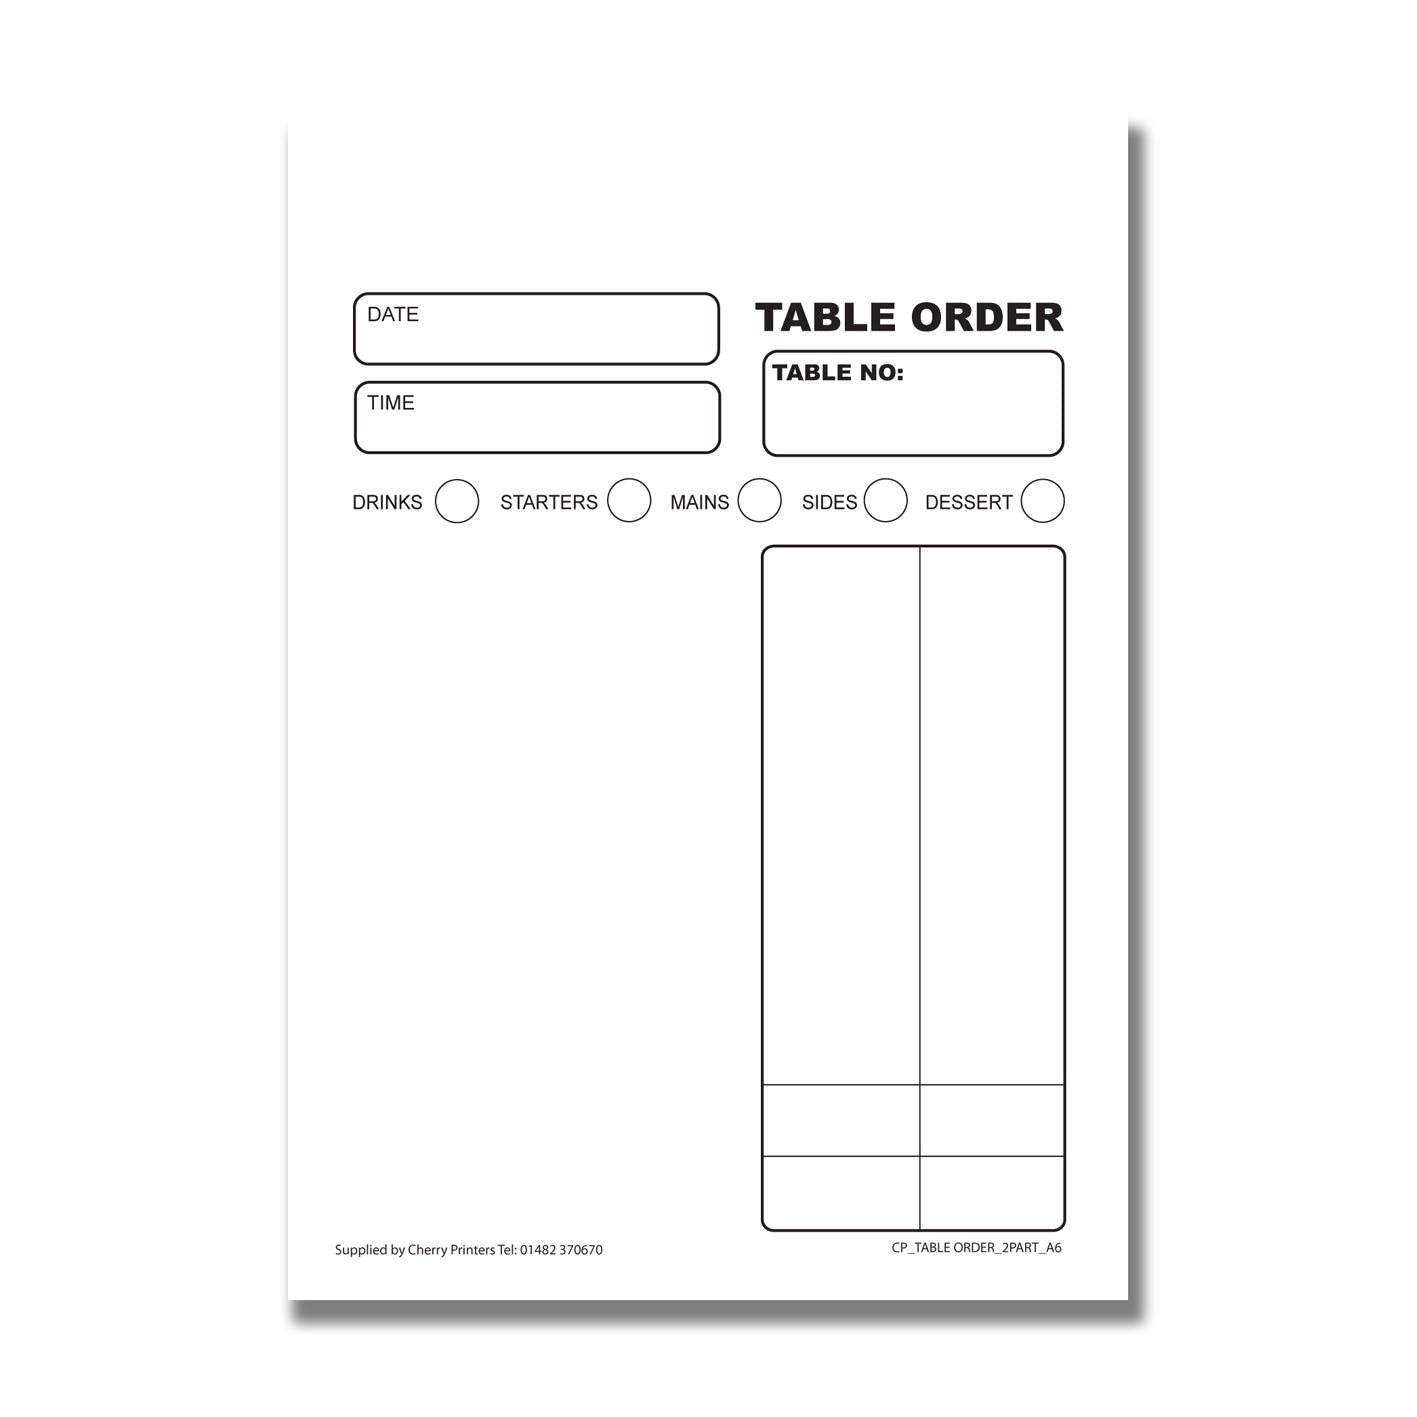 NCR Table Order Duplicate Book A6